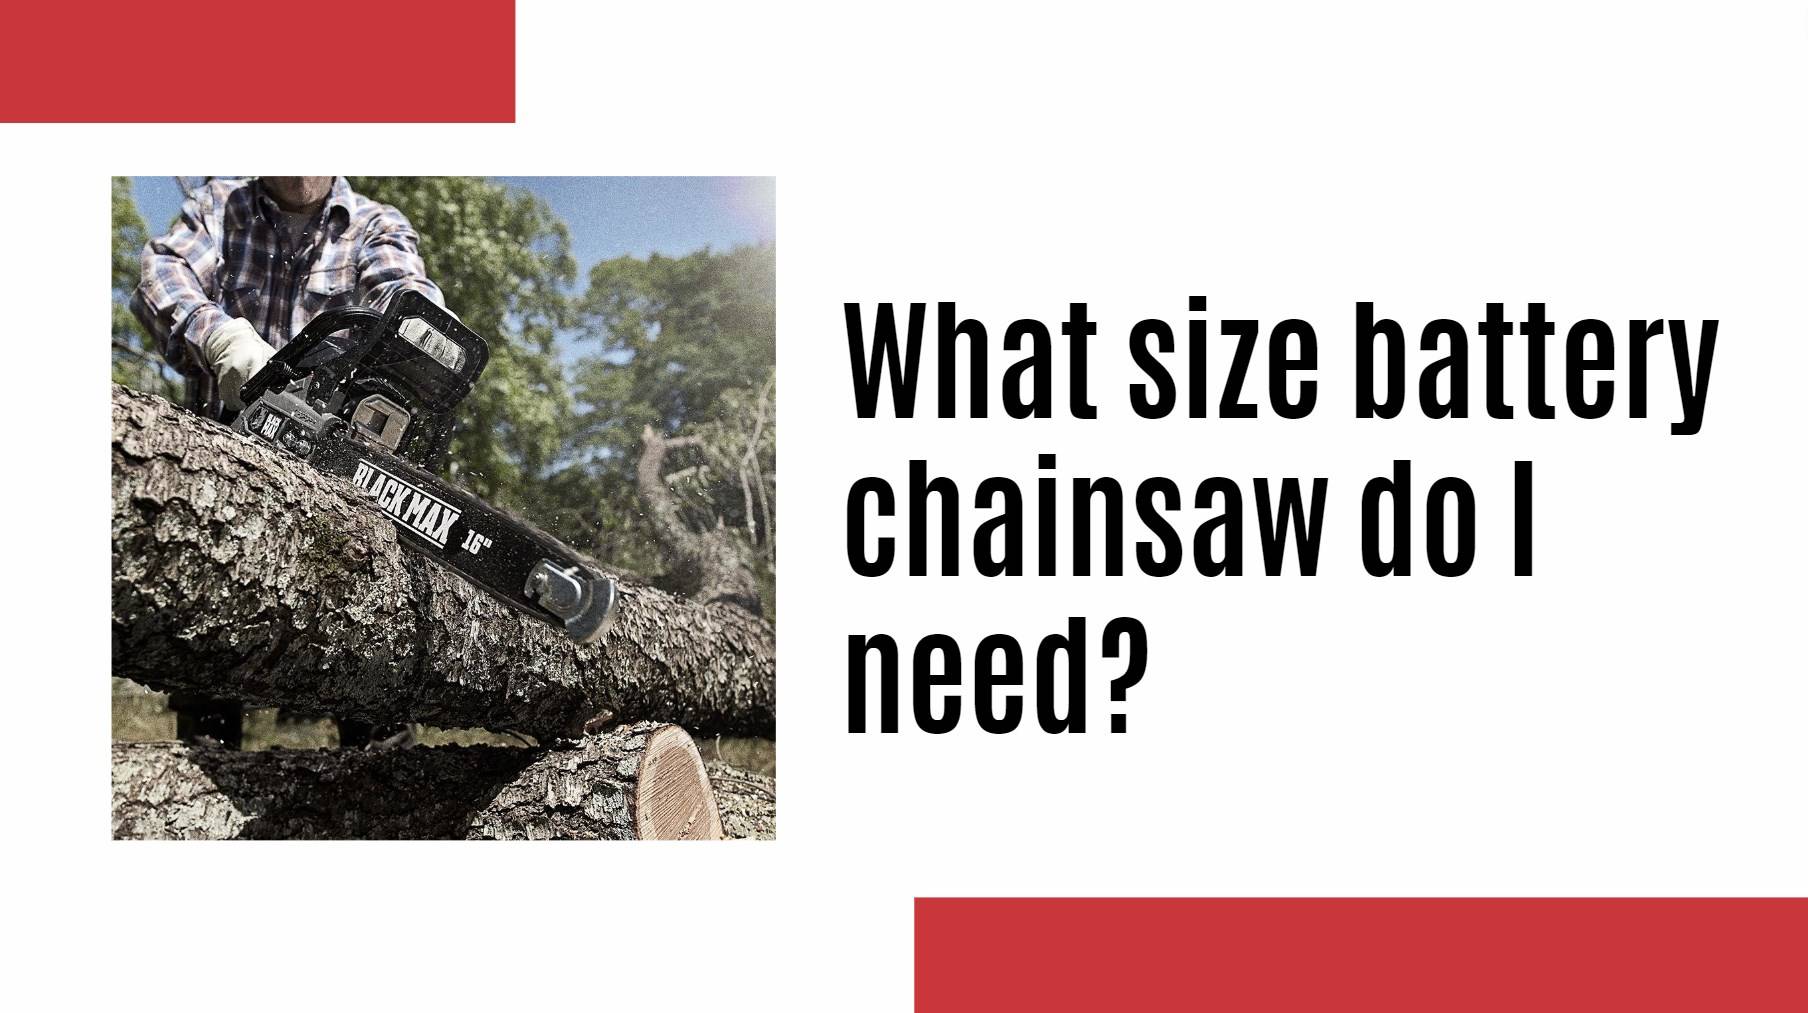 chainsaw battery factory. What size battery chainsaw do I need?